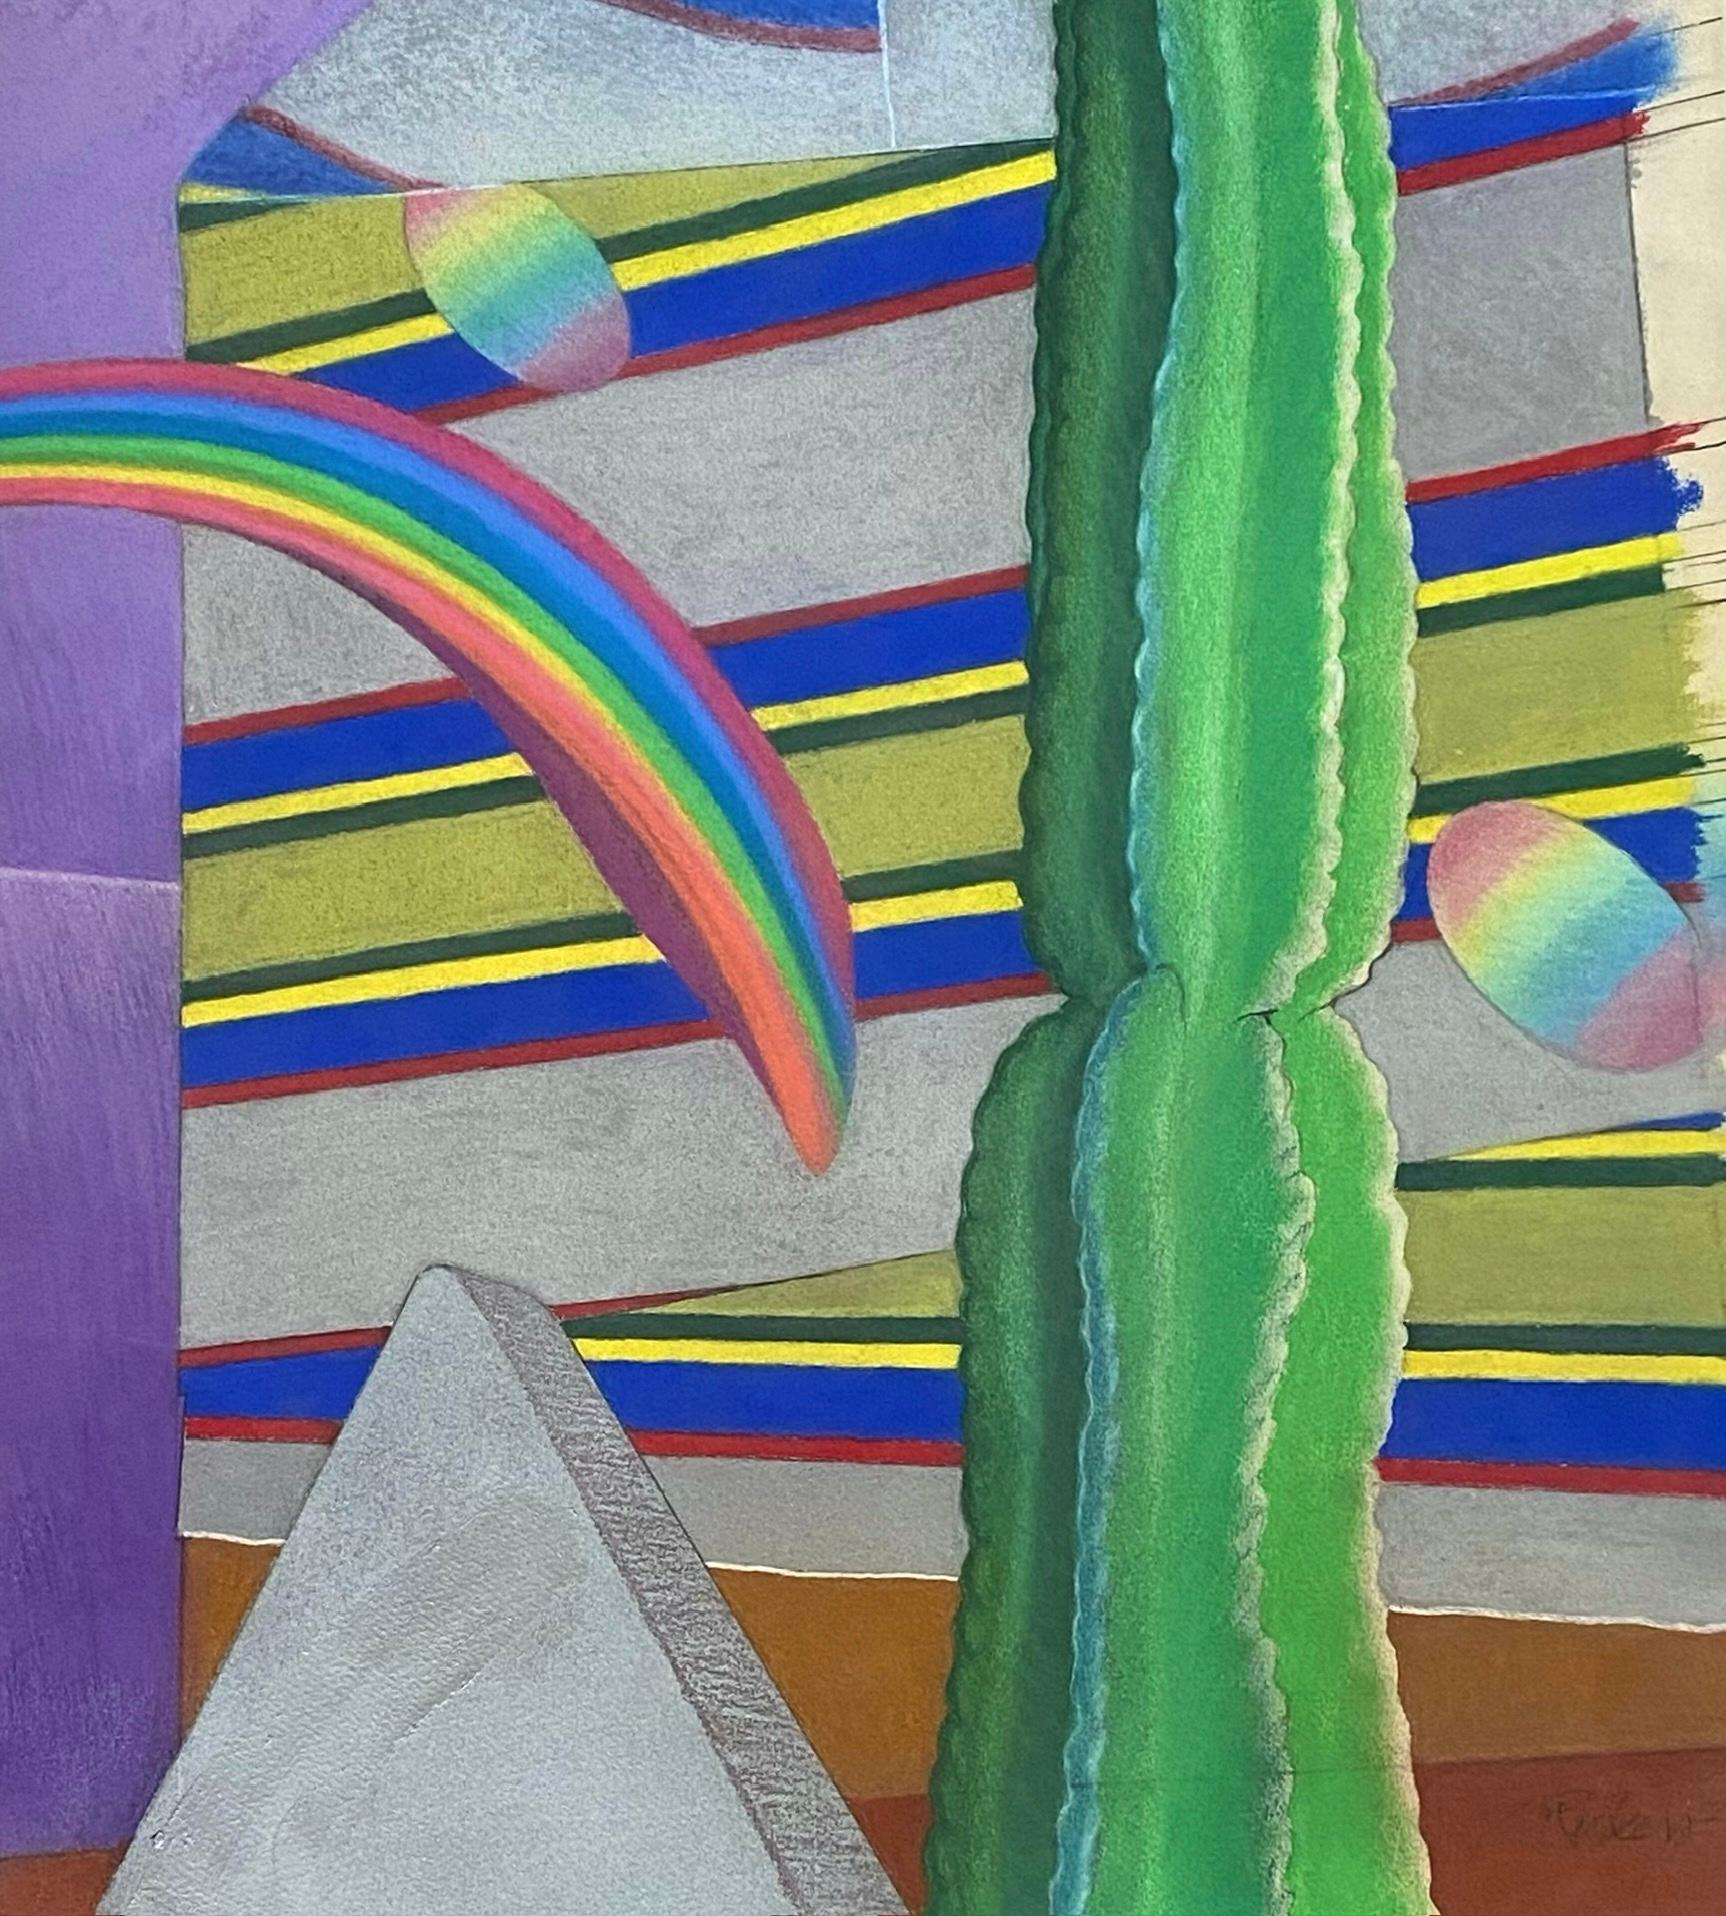 “Cactus, Pyramid, and Rainbow” - Post-Modern Art by Tom Rickers